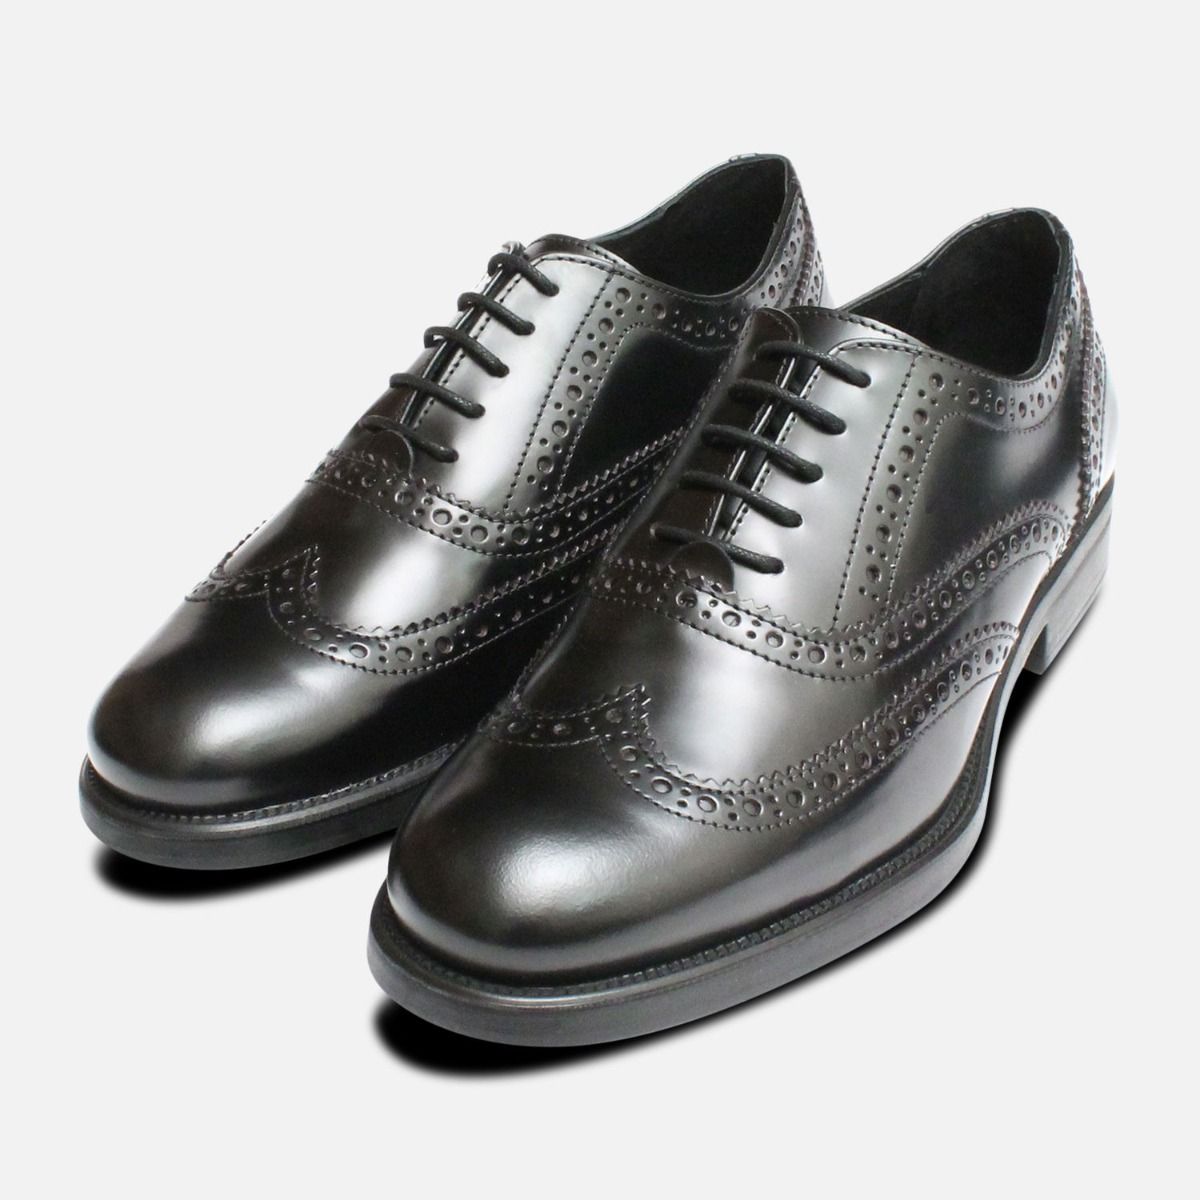 Black Oxford Rubber Sole Brogues Made in Italy